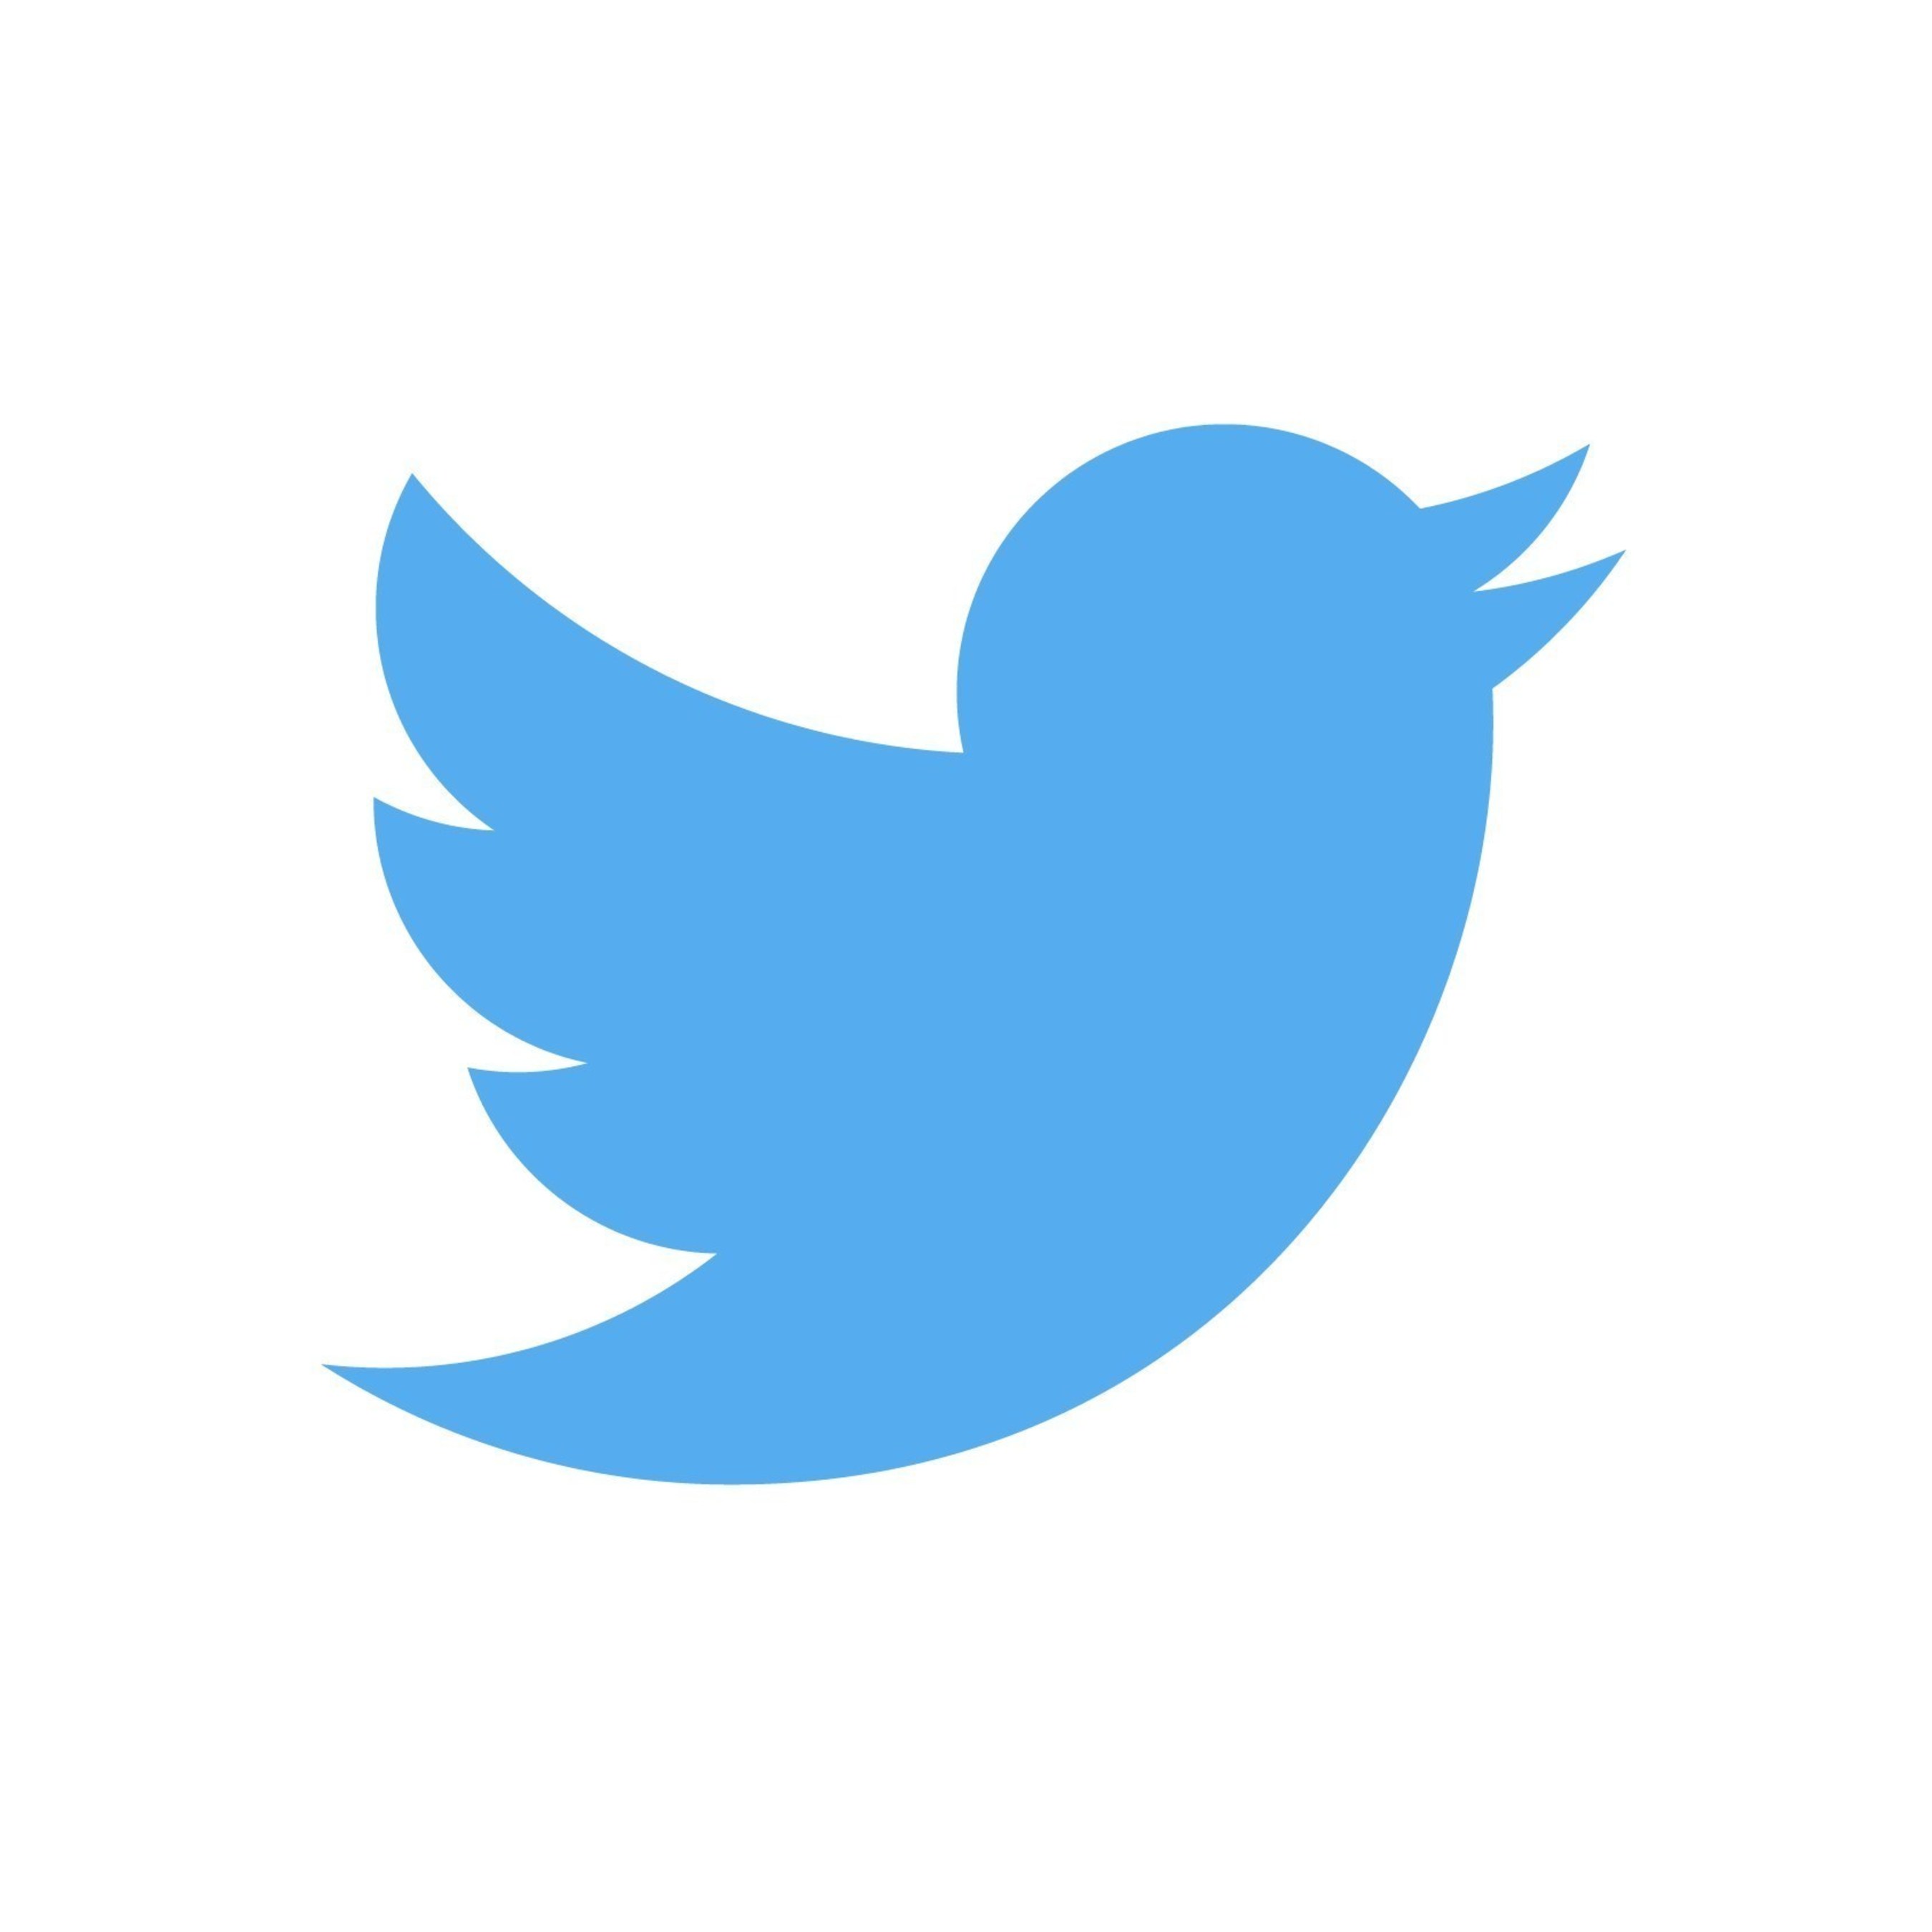 Twitter Announces Plans for Rio 2016 Olympic Games